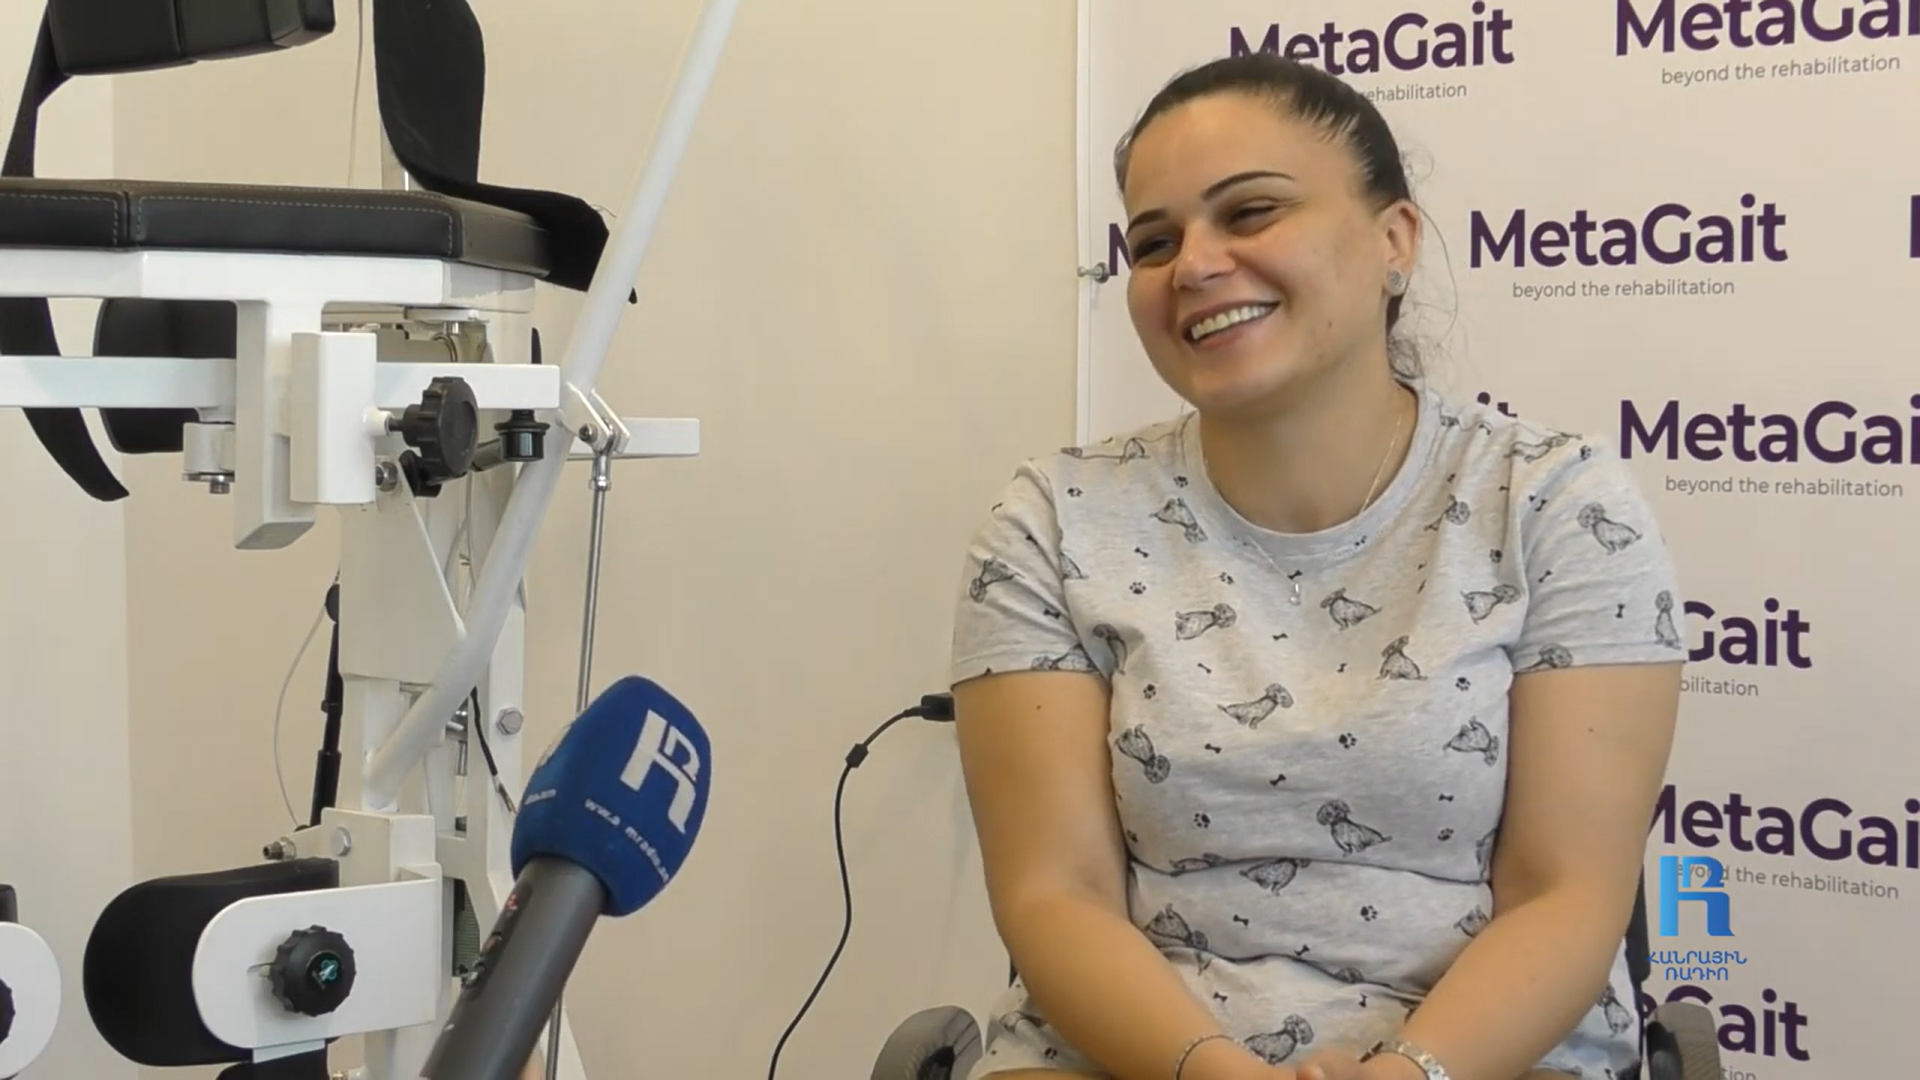 The innovative MetaGait was mentioned by Public Radio Armenia